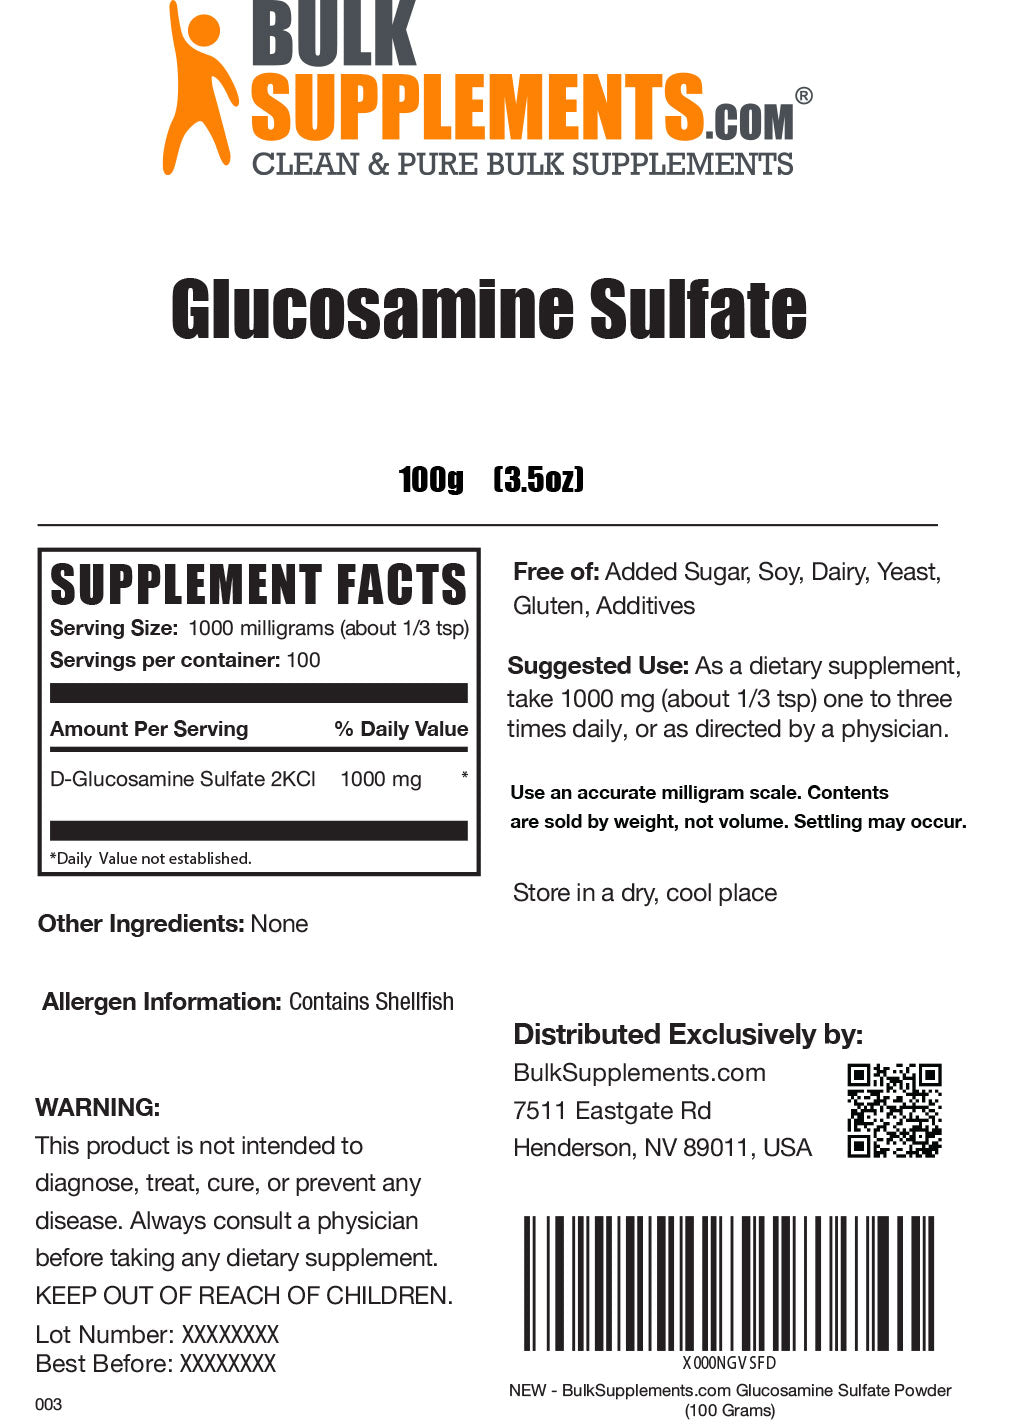 Glucosamine Sulfate supplement facts 100g